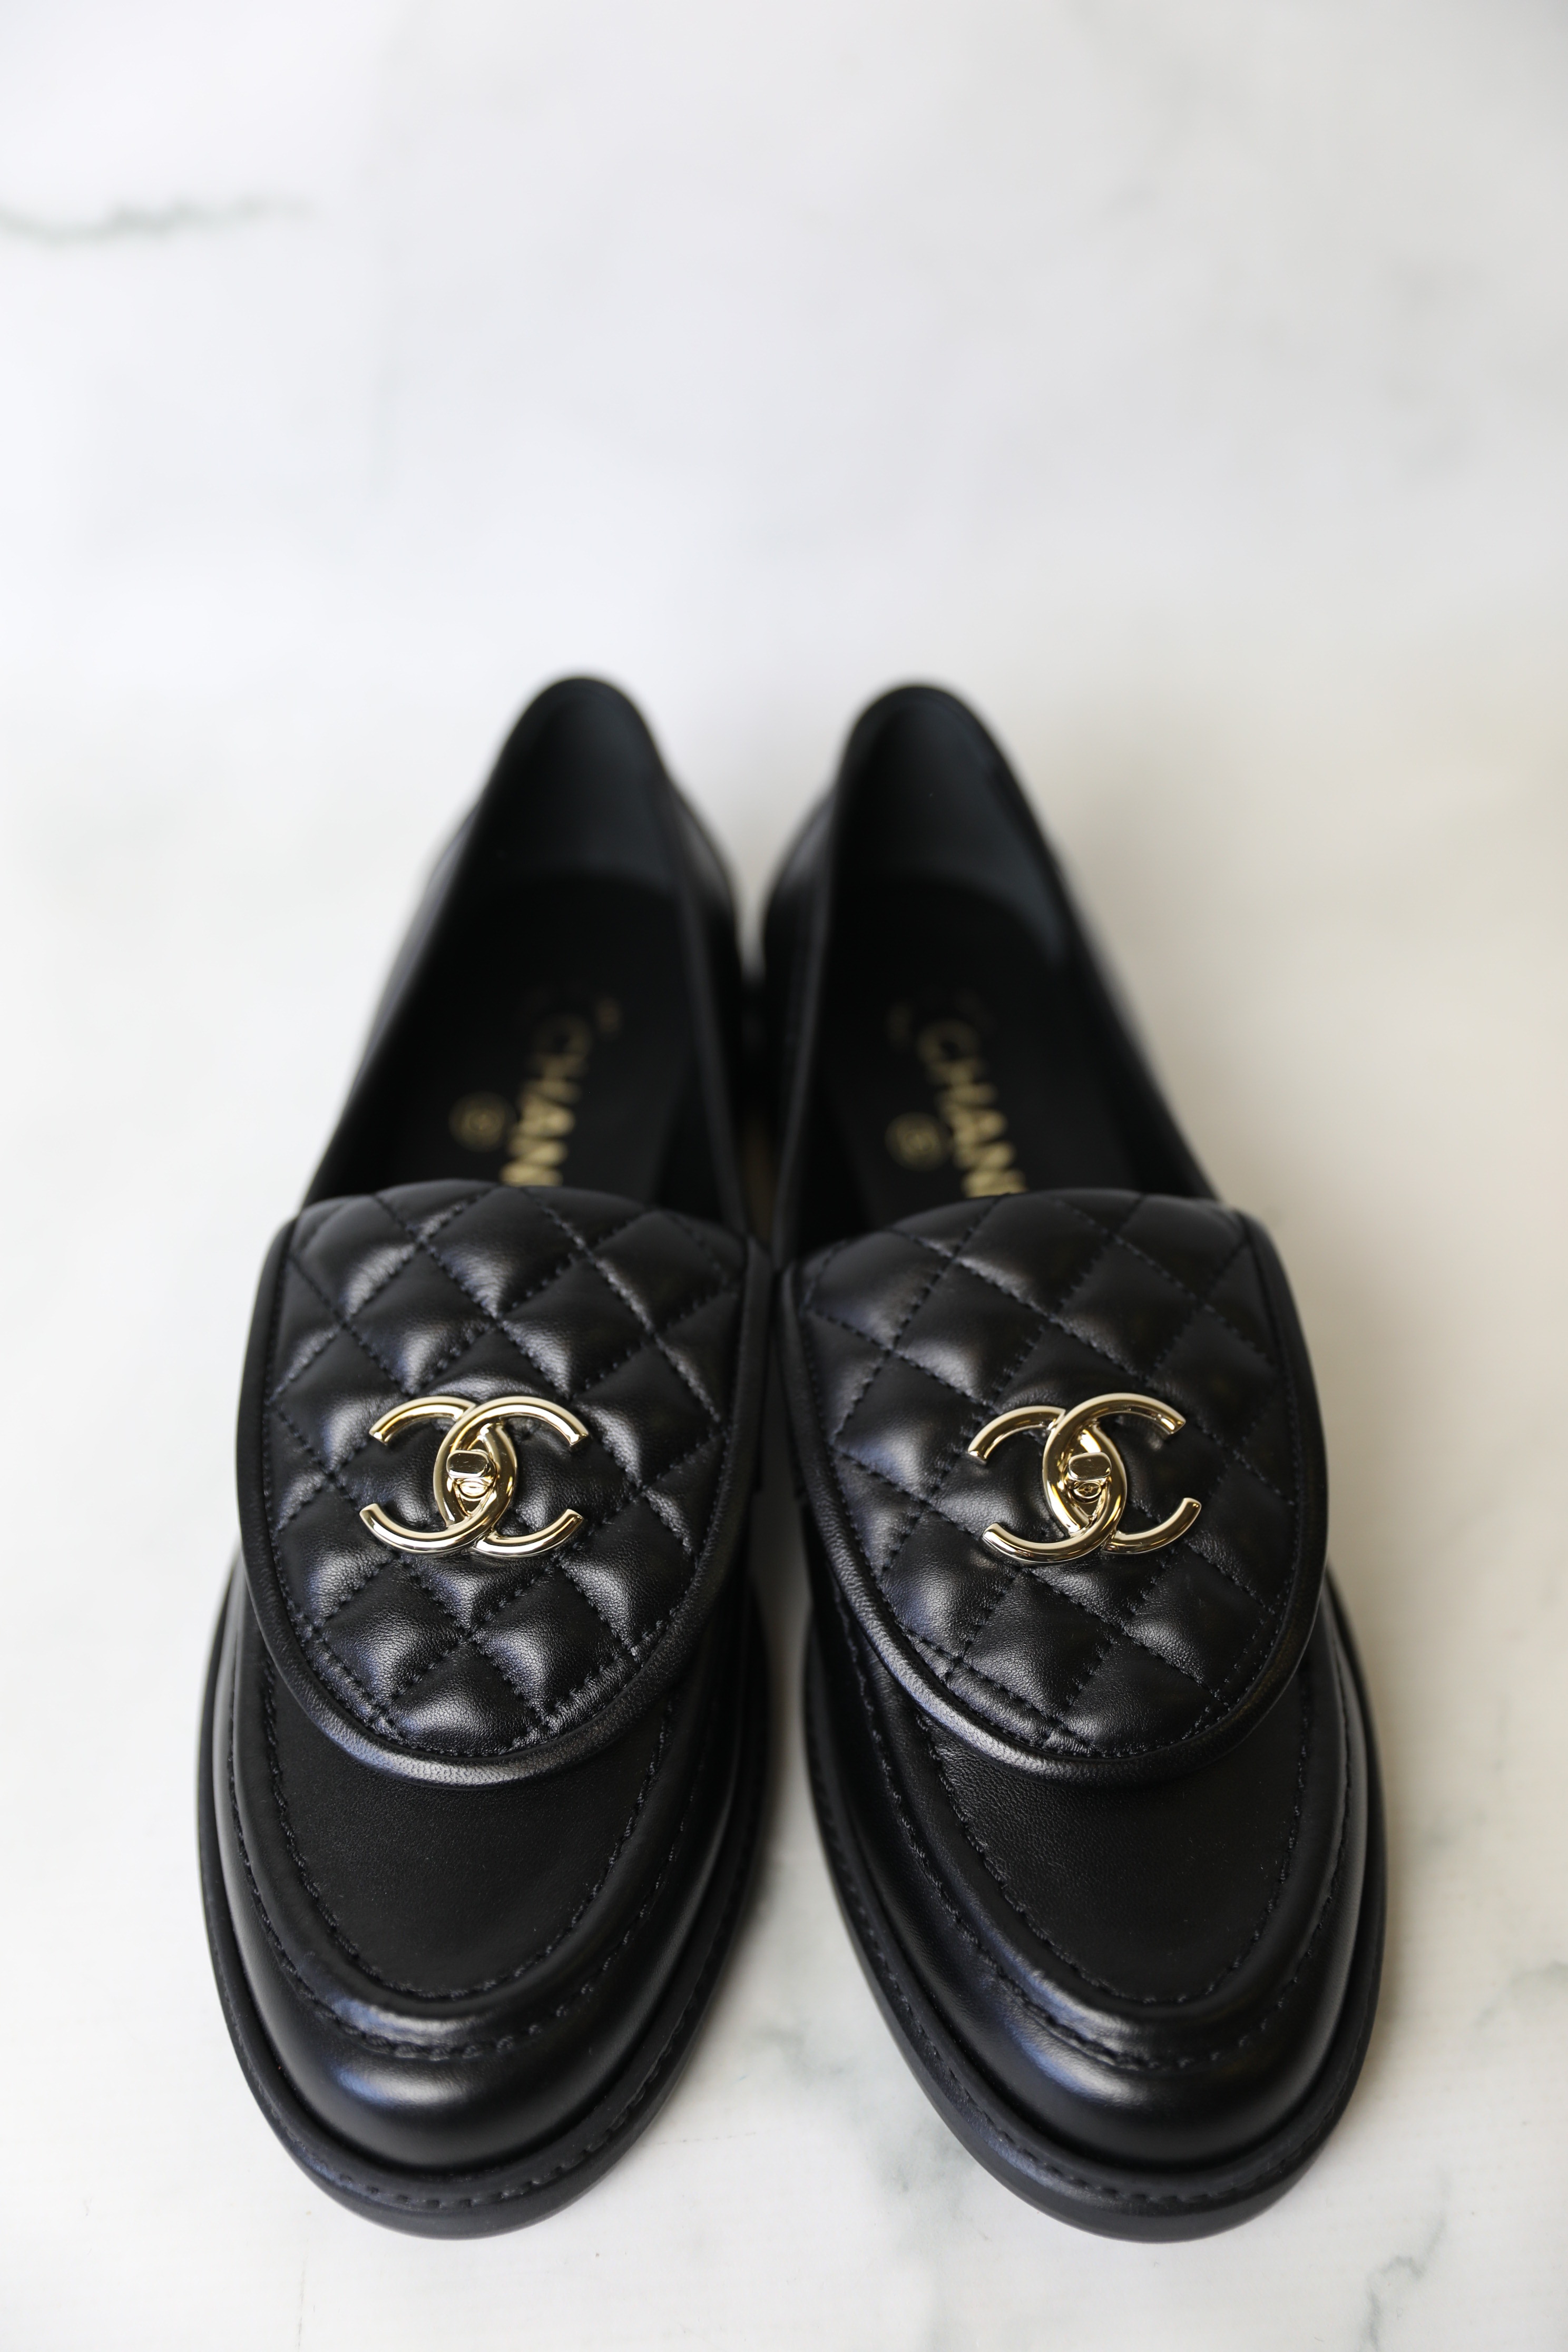 Chanel Turnlock Loafer, Black with Gold Hardware, Size 37, New in Box GA001